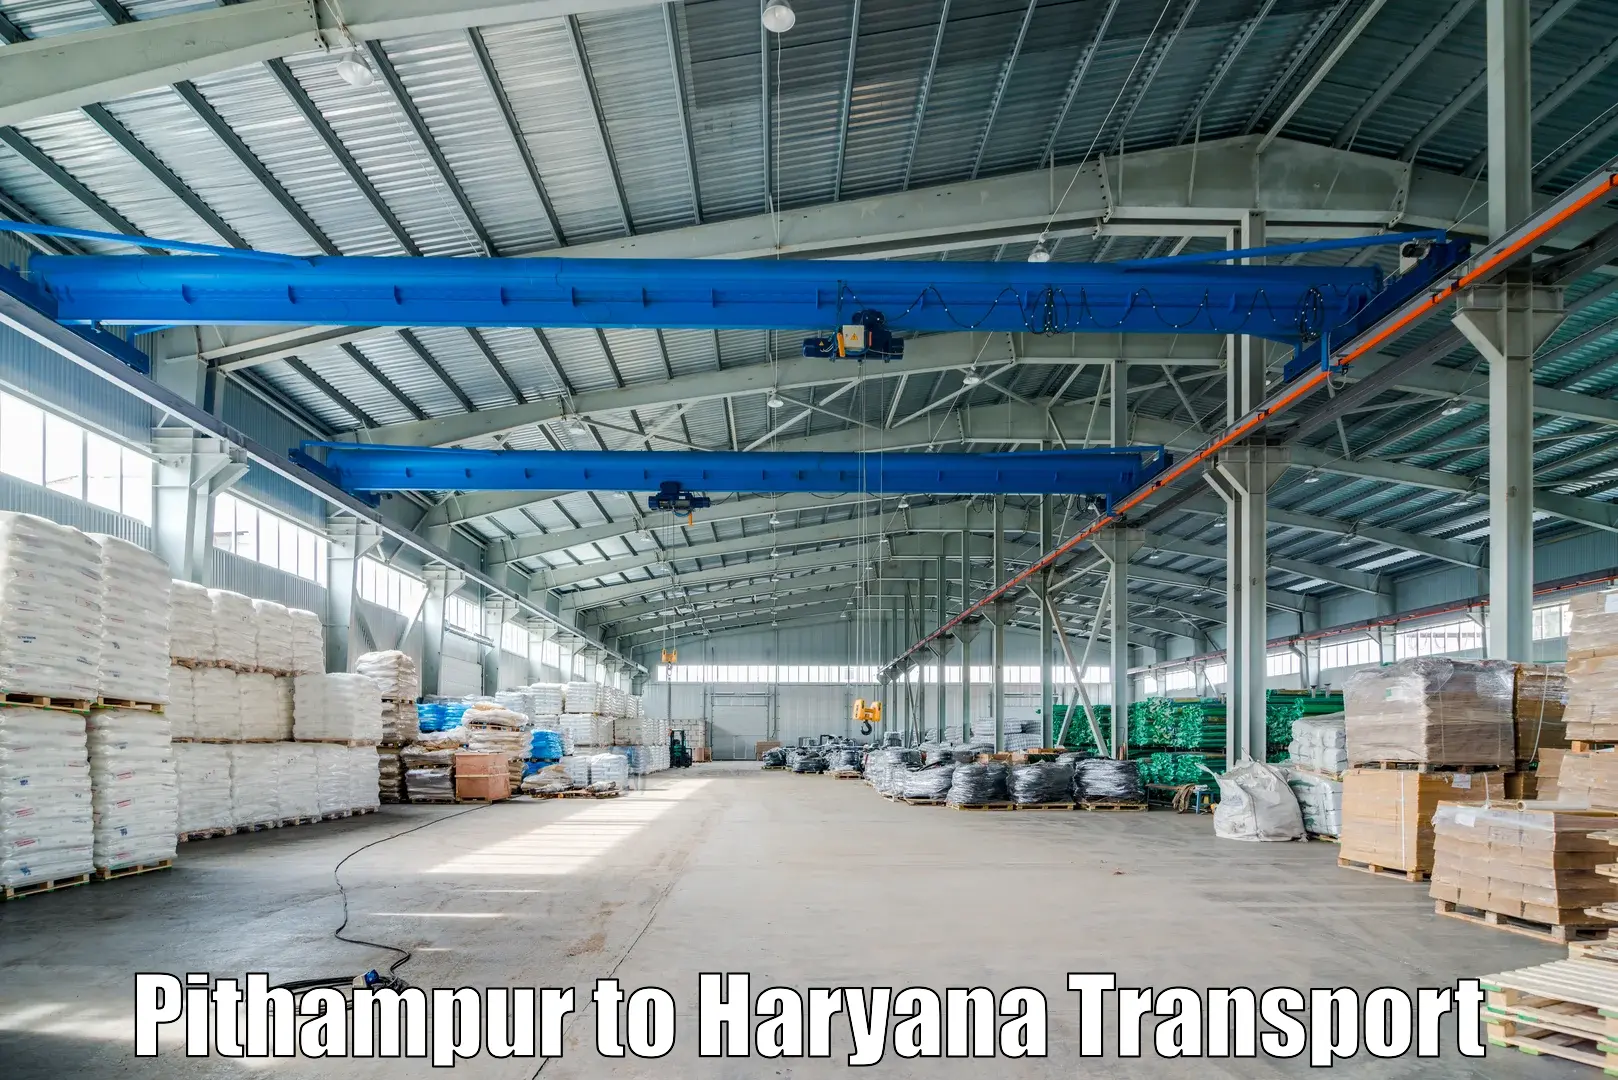 Daily transport service Pithampur to NCR Haryana